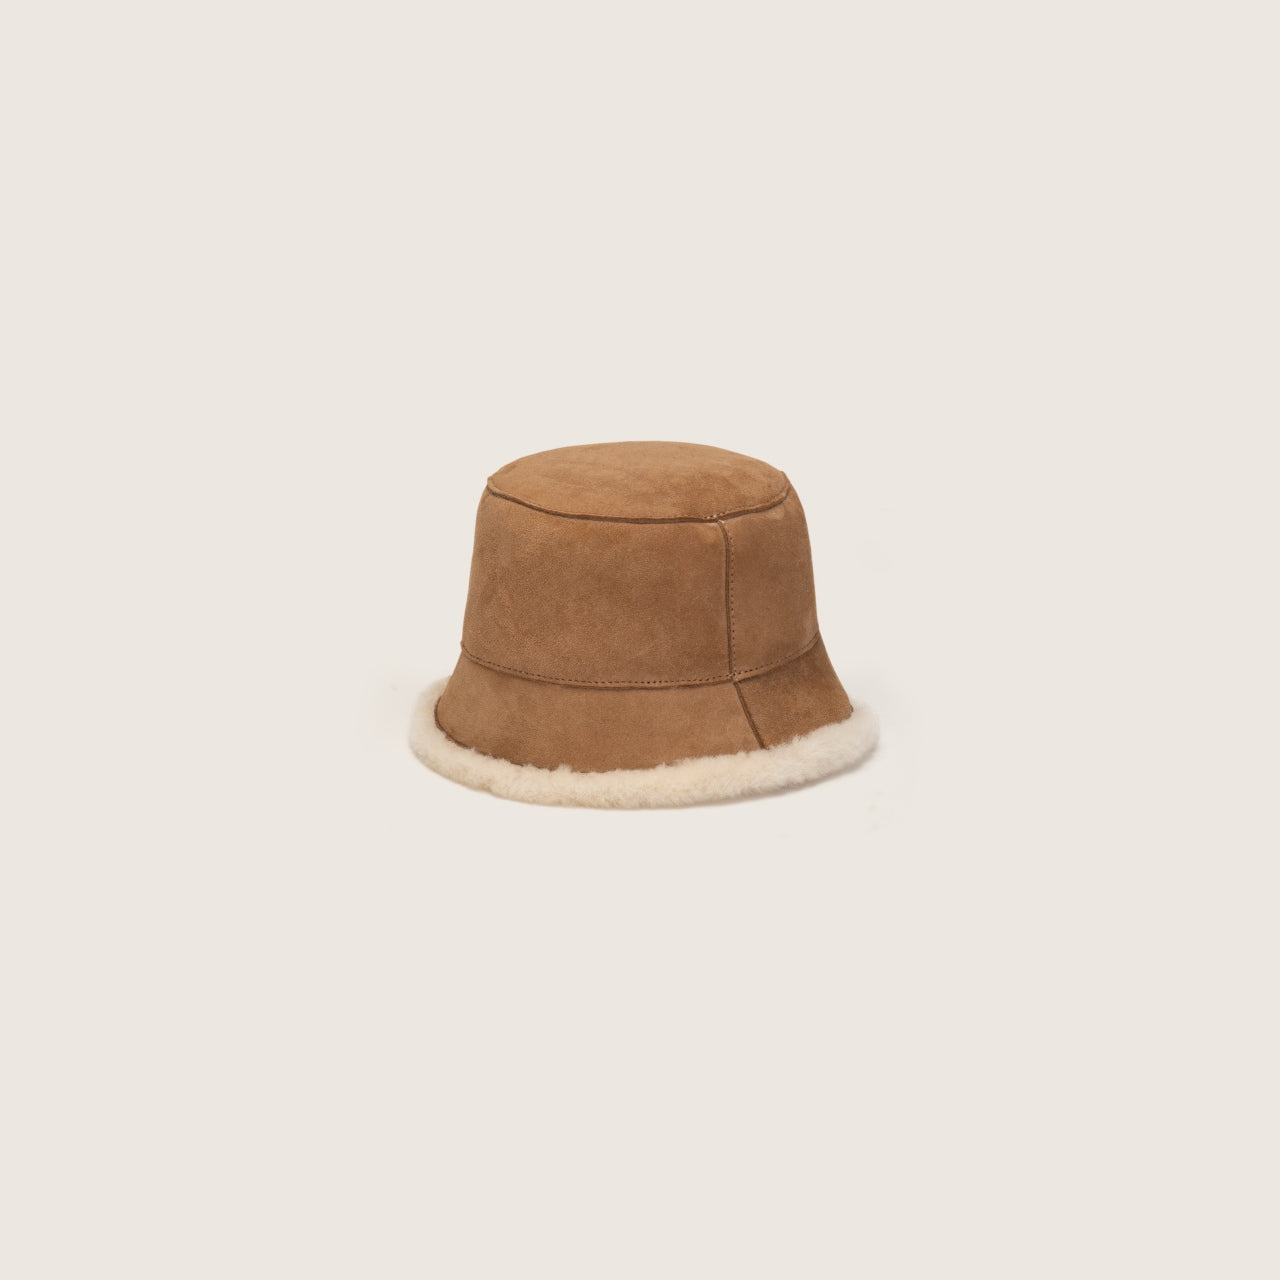 Side view of the wool ugg bucket hat